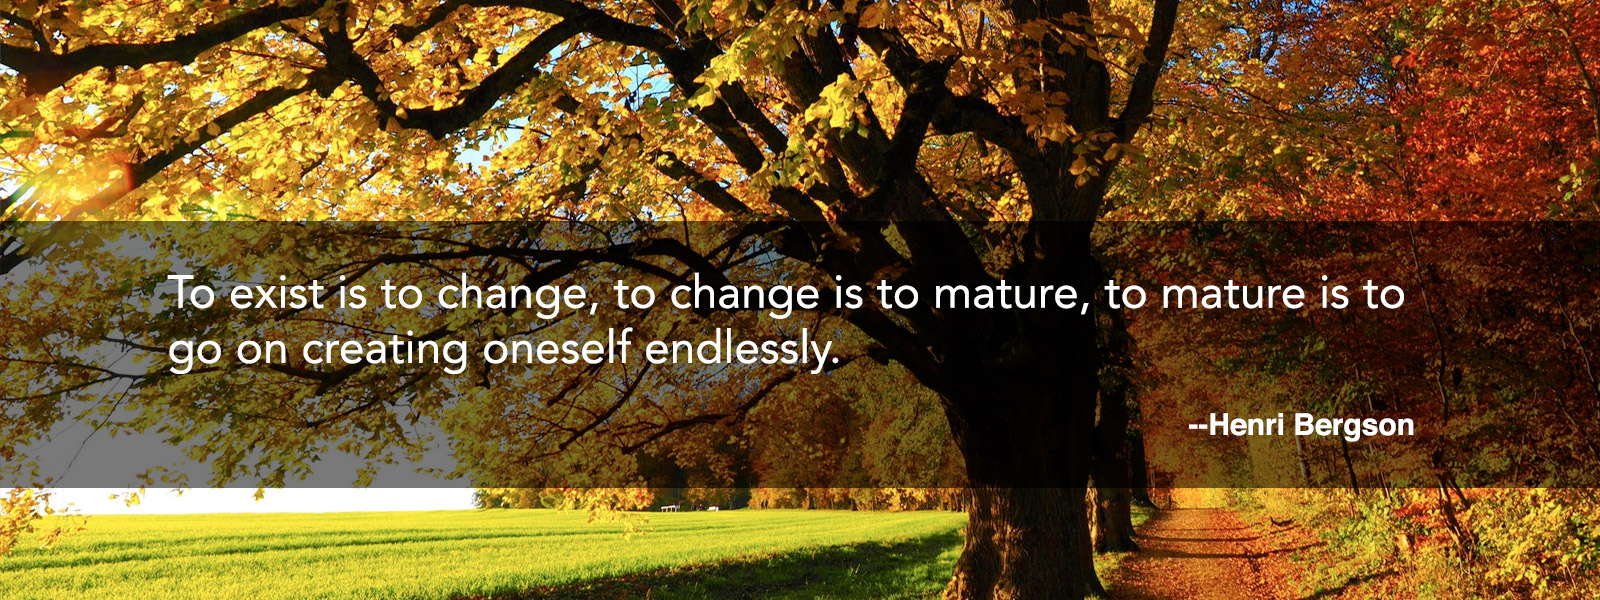 change is to mature